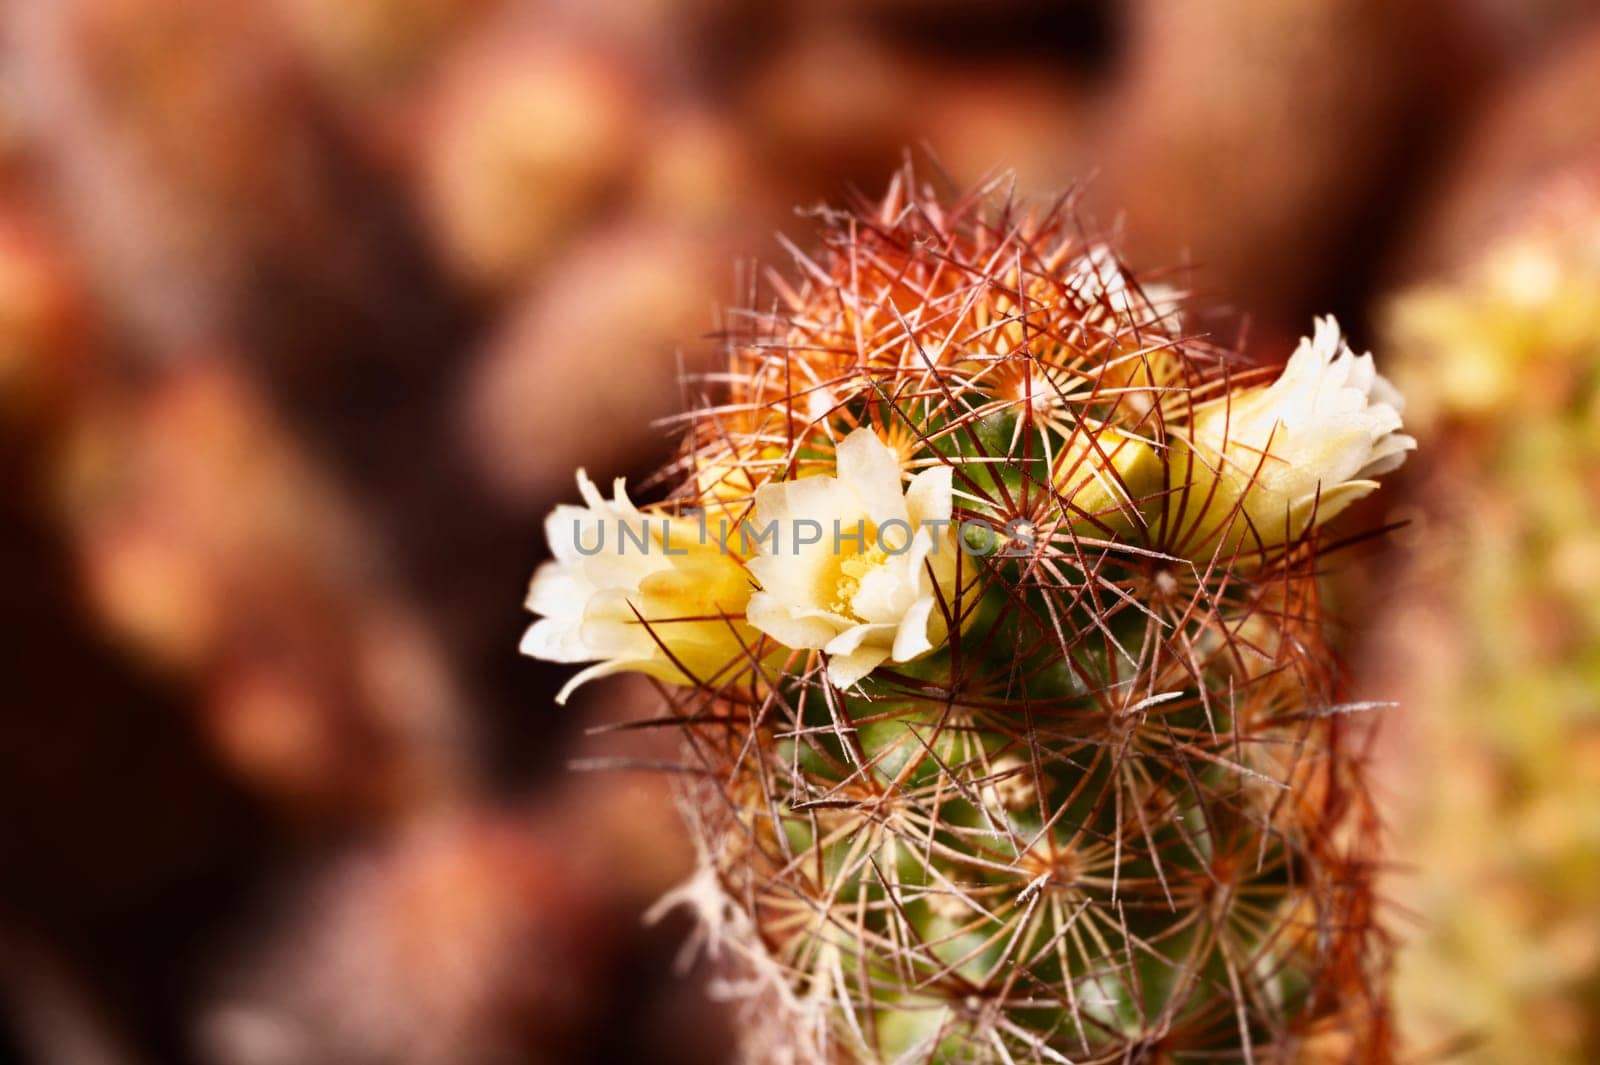 Mammillaria elongata plant -gold lace cactus  or lady finger cactus - ,plant with oval stems covered with brown spines with yellow flowers 